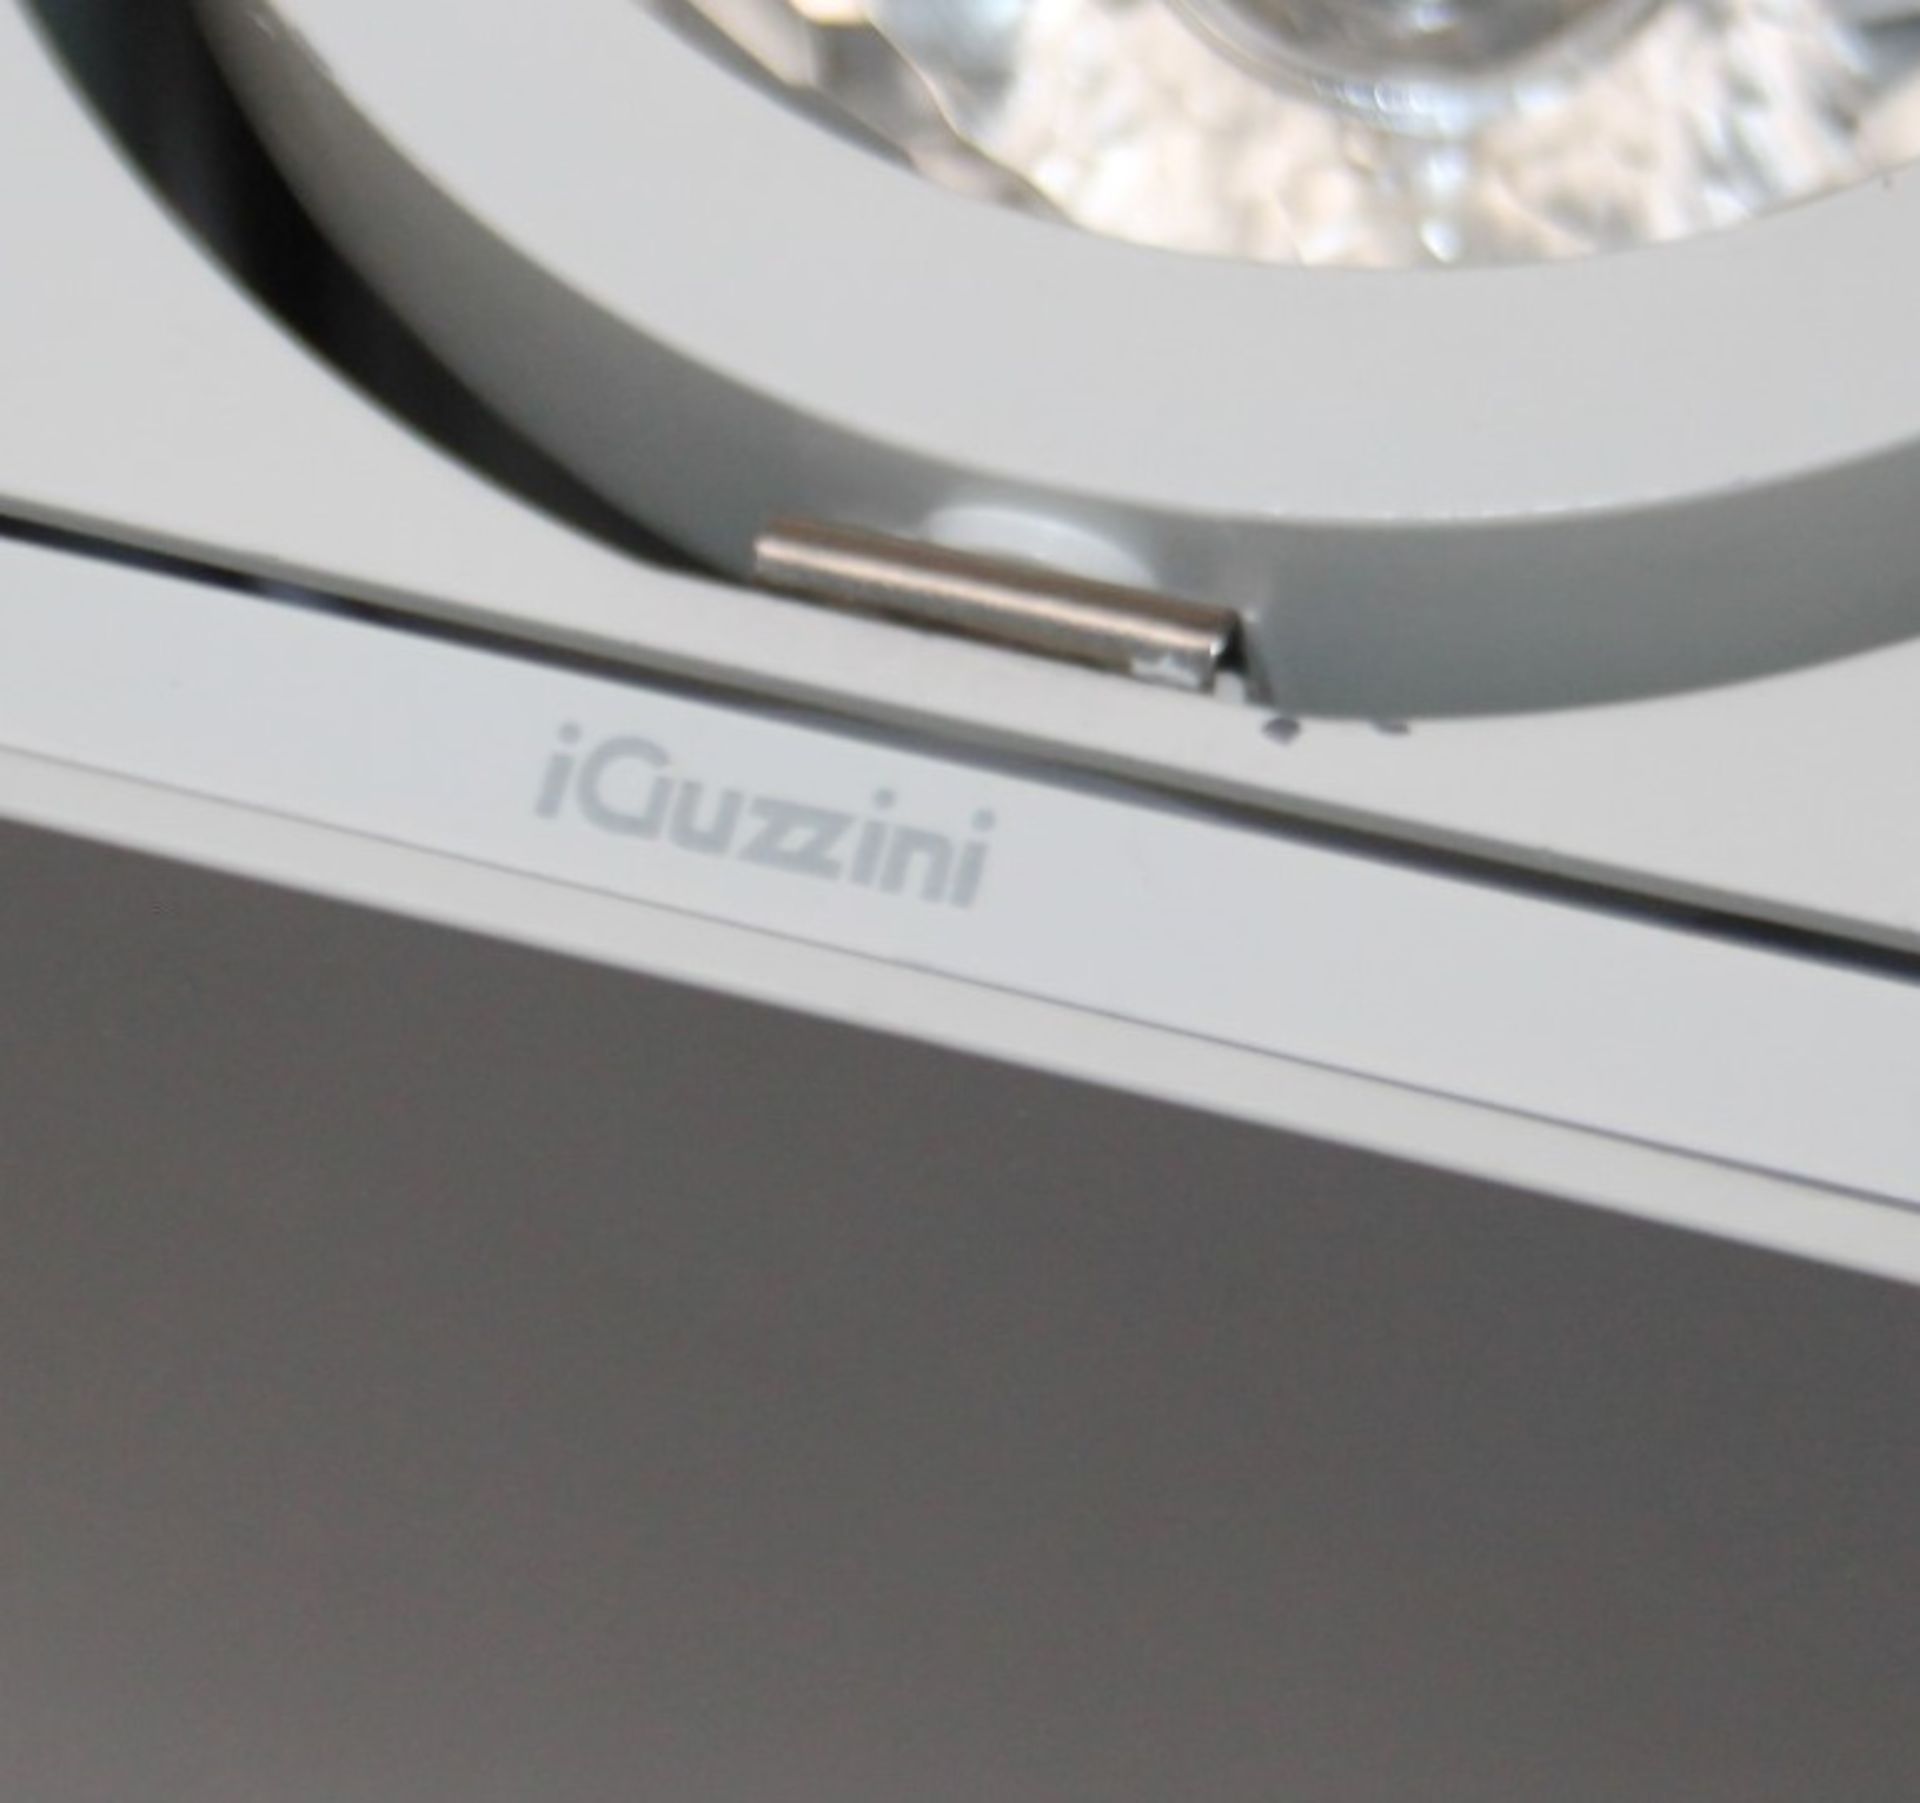 4 x IGUZZINI Commercial Twin Directional Gimble Spot Light Fittings In Metal Casings (5326) - Image 5 of 7